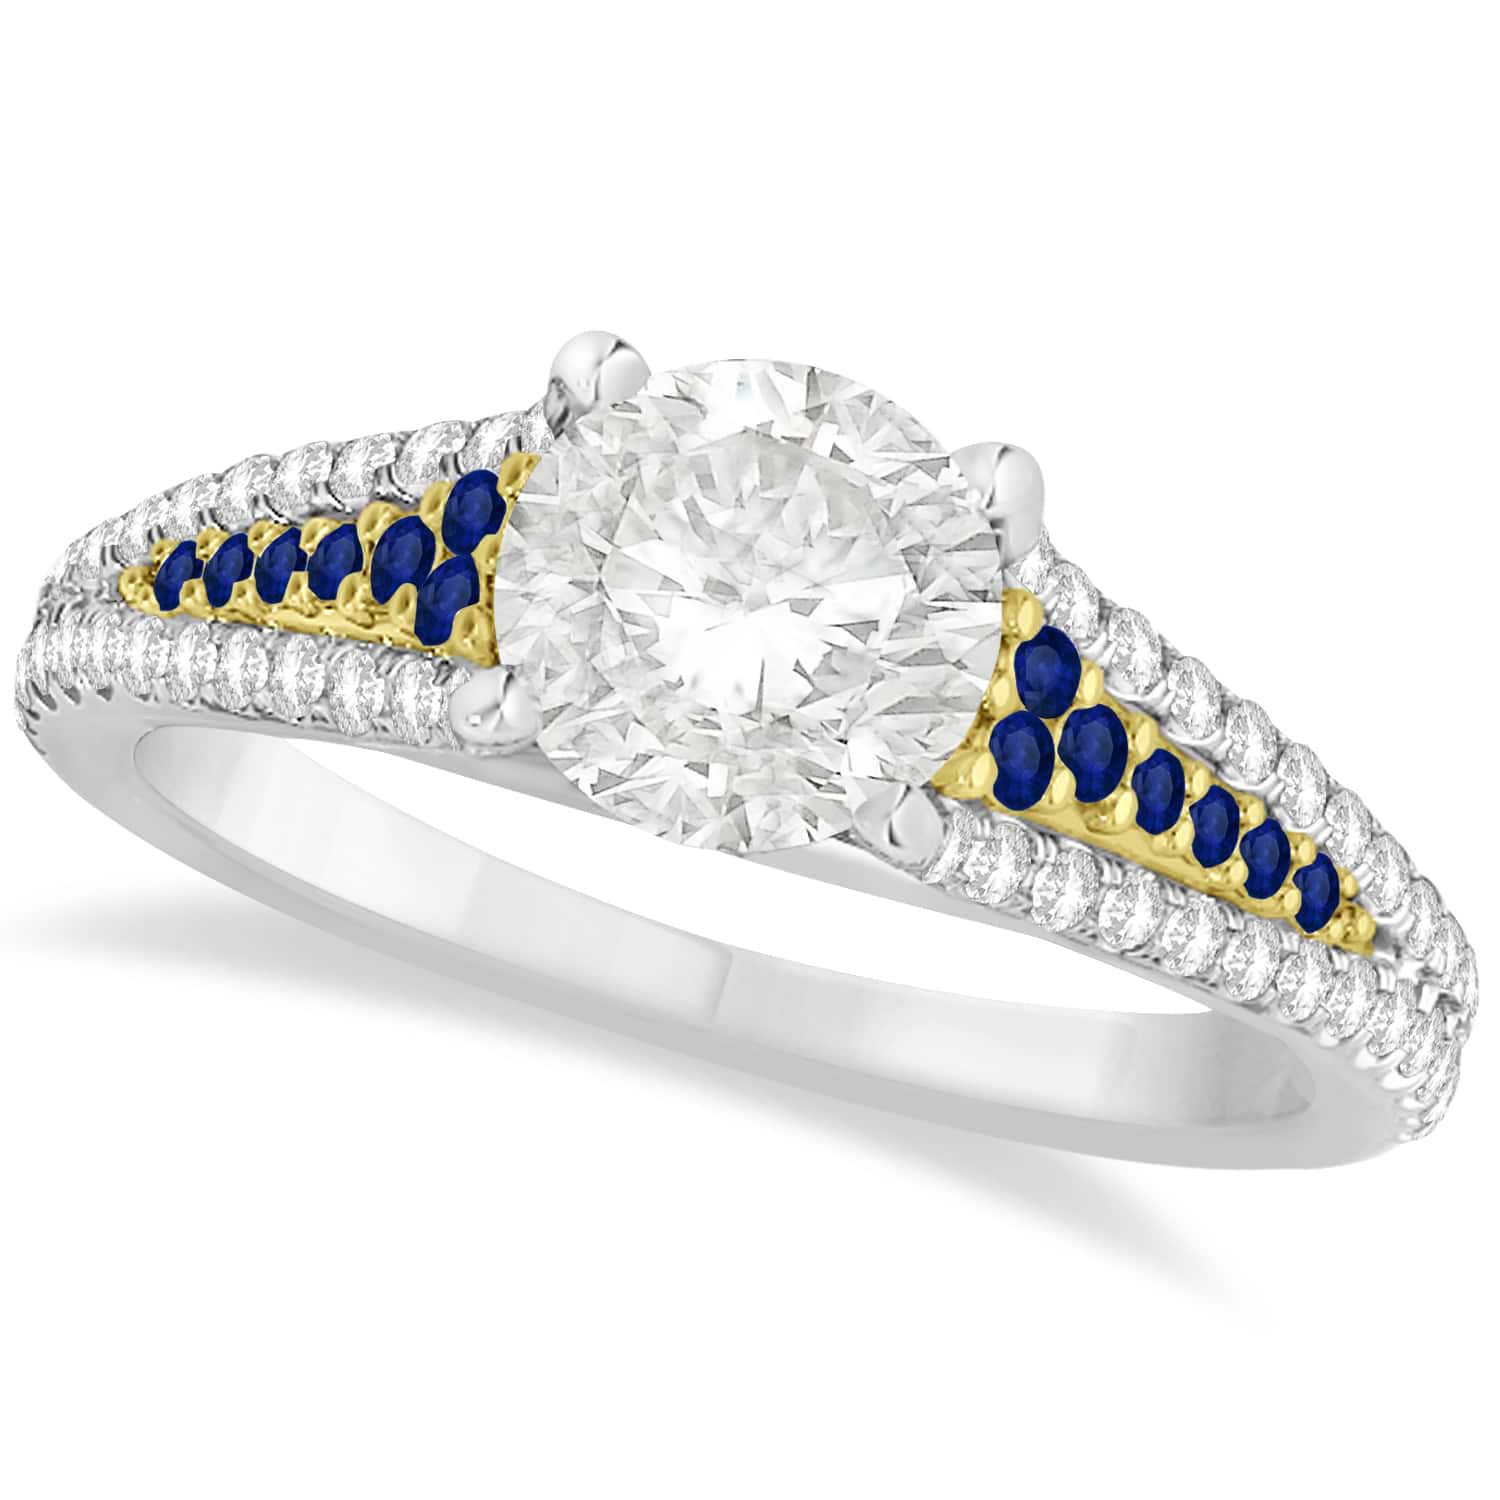 Blue Sapphire, Diamond Engagement Ring 18k Two Tone Yellow Gold 1.33ct